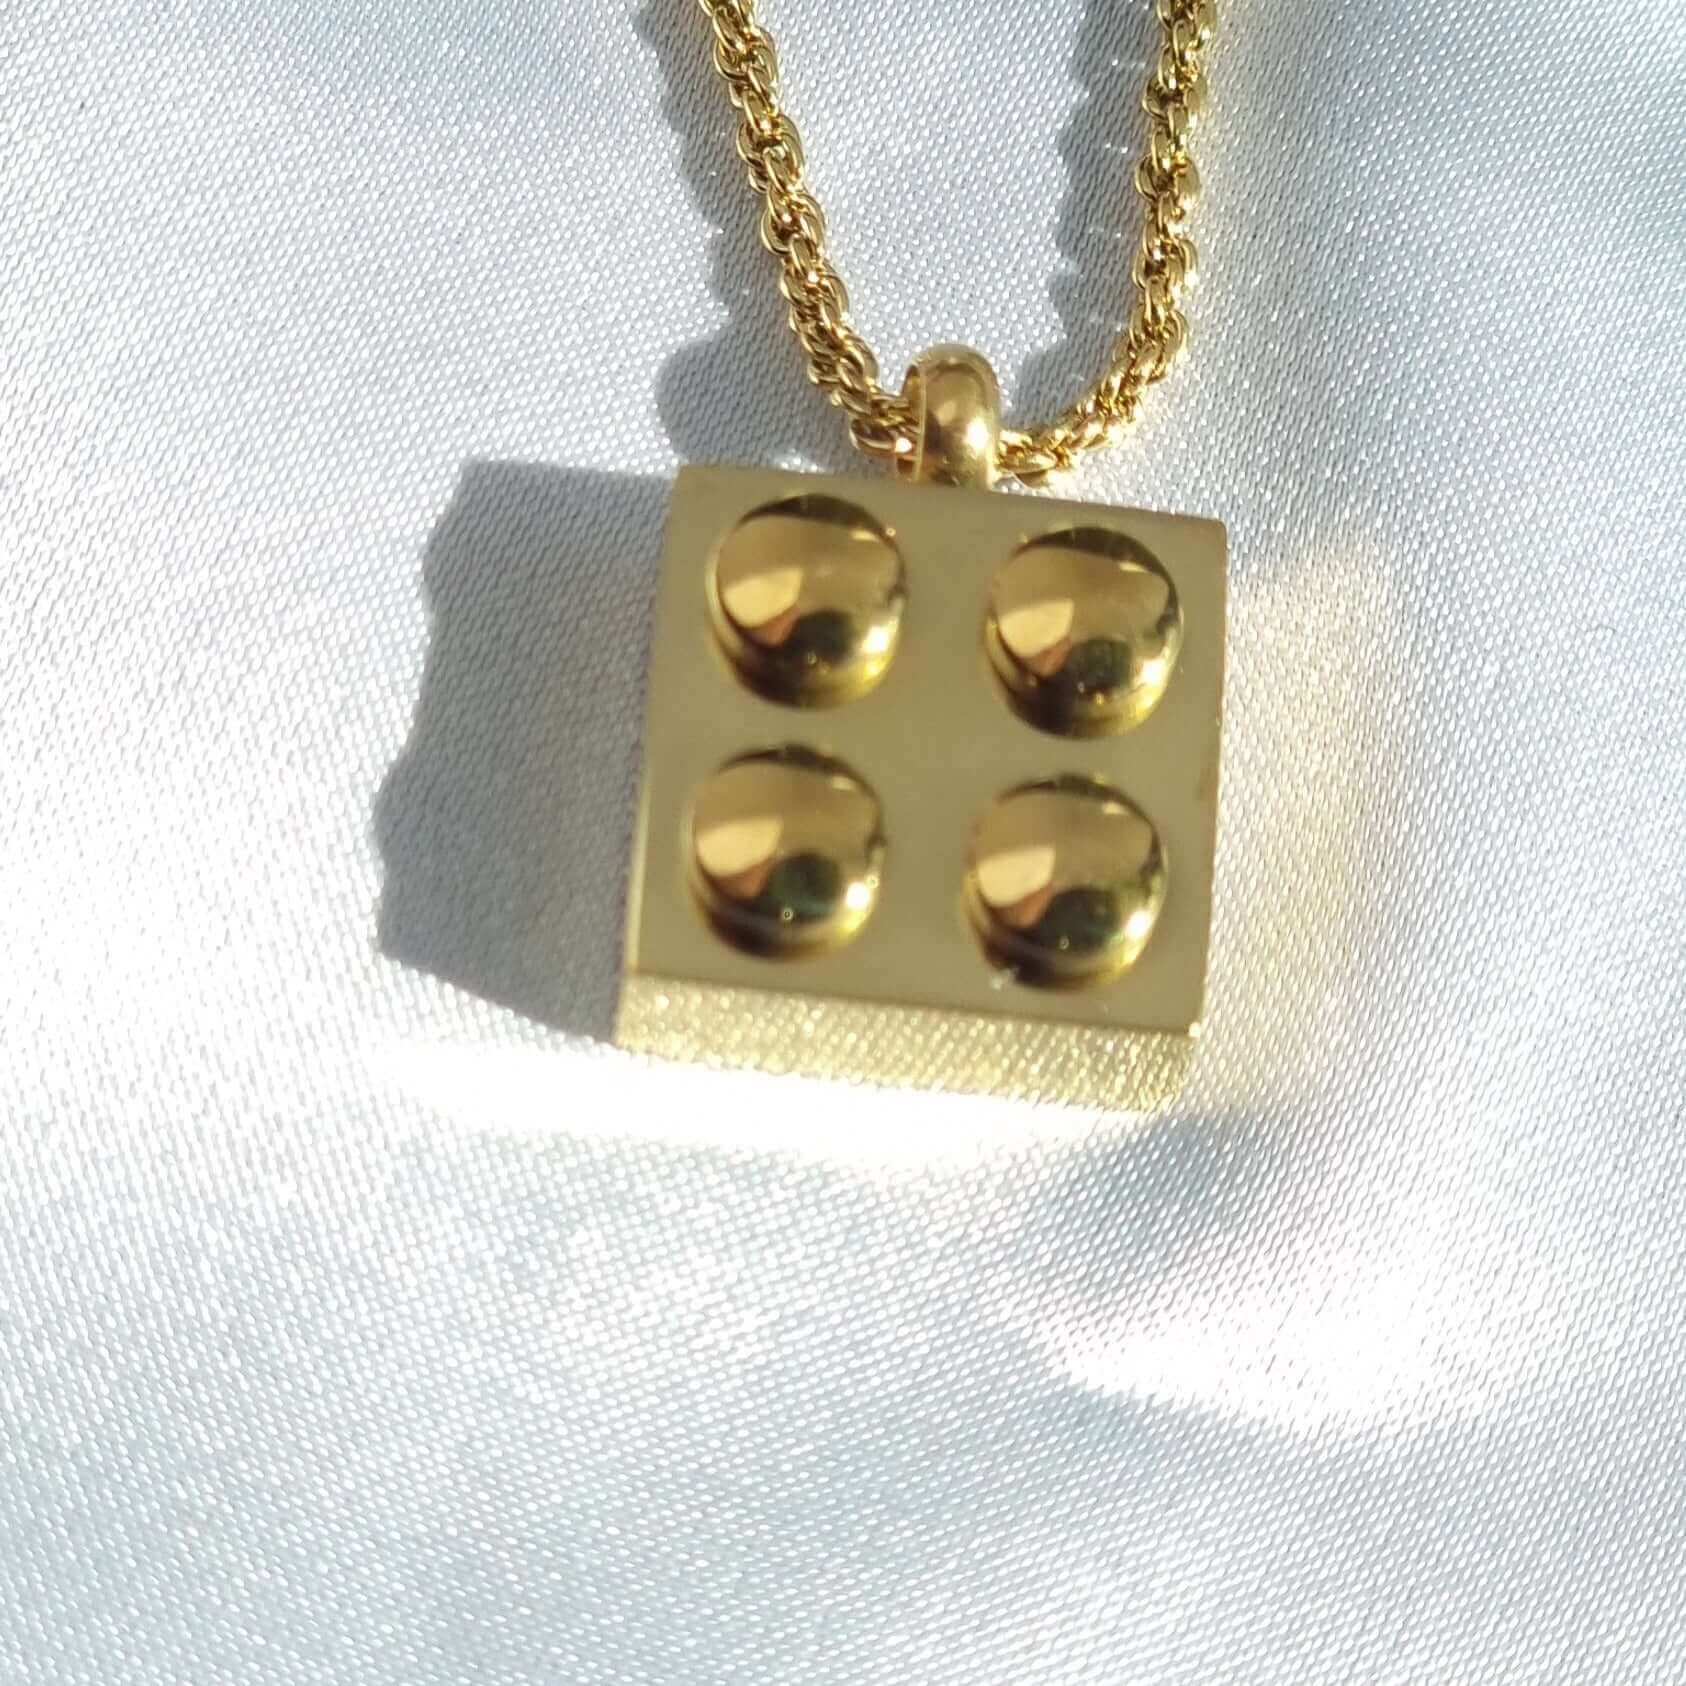 Lego-inspired Pendant (9PG7A5D4G) by cashley